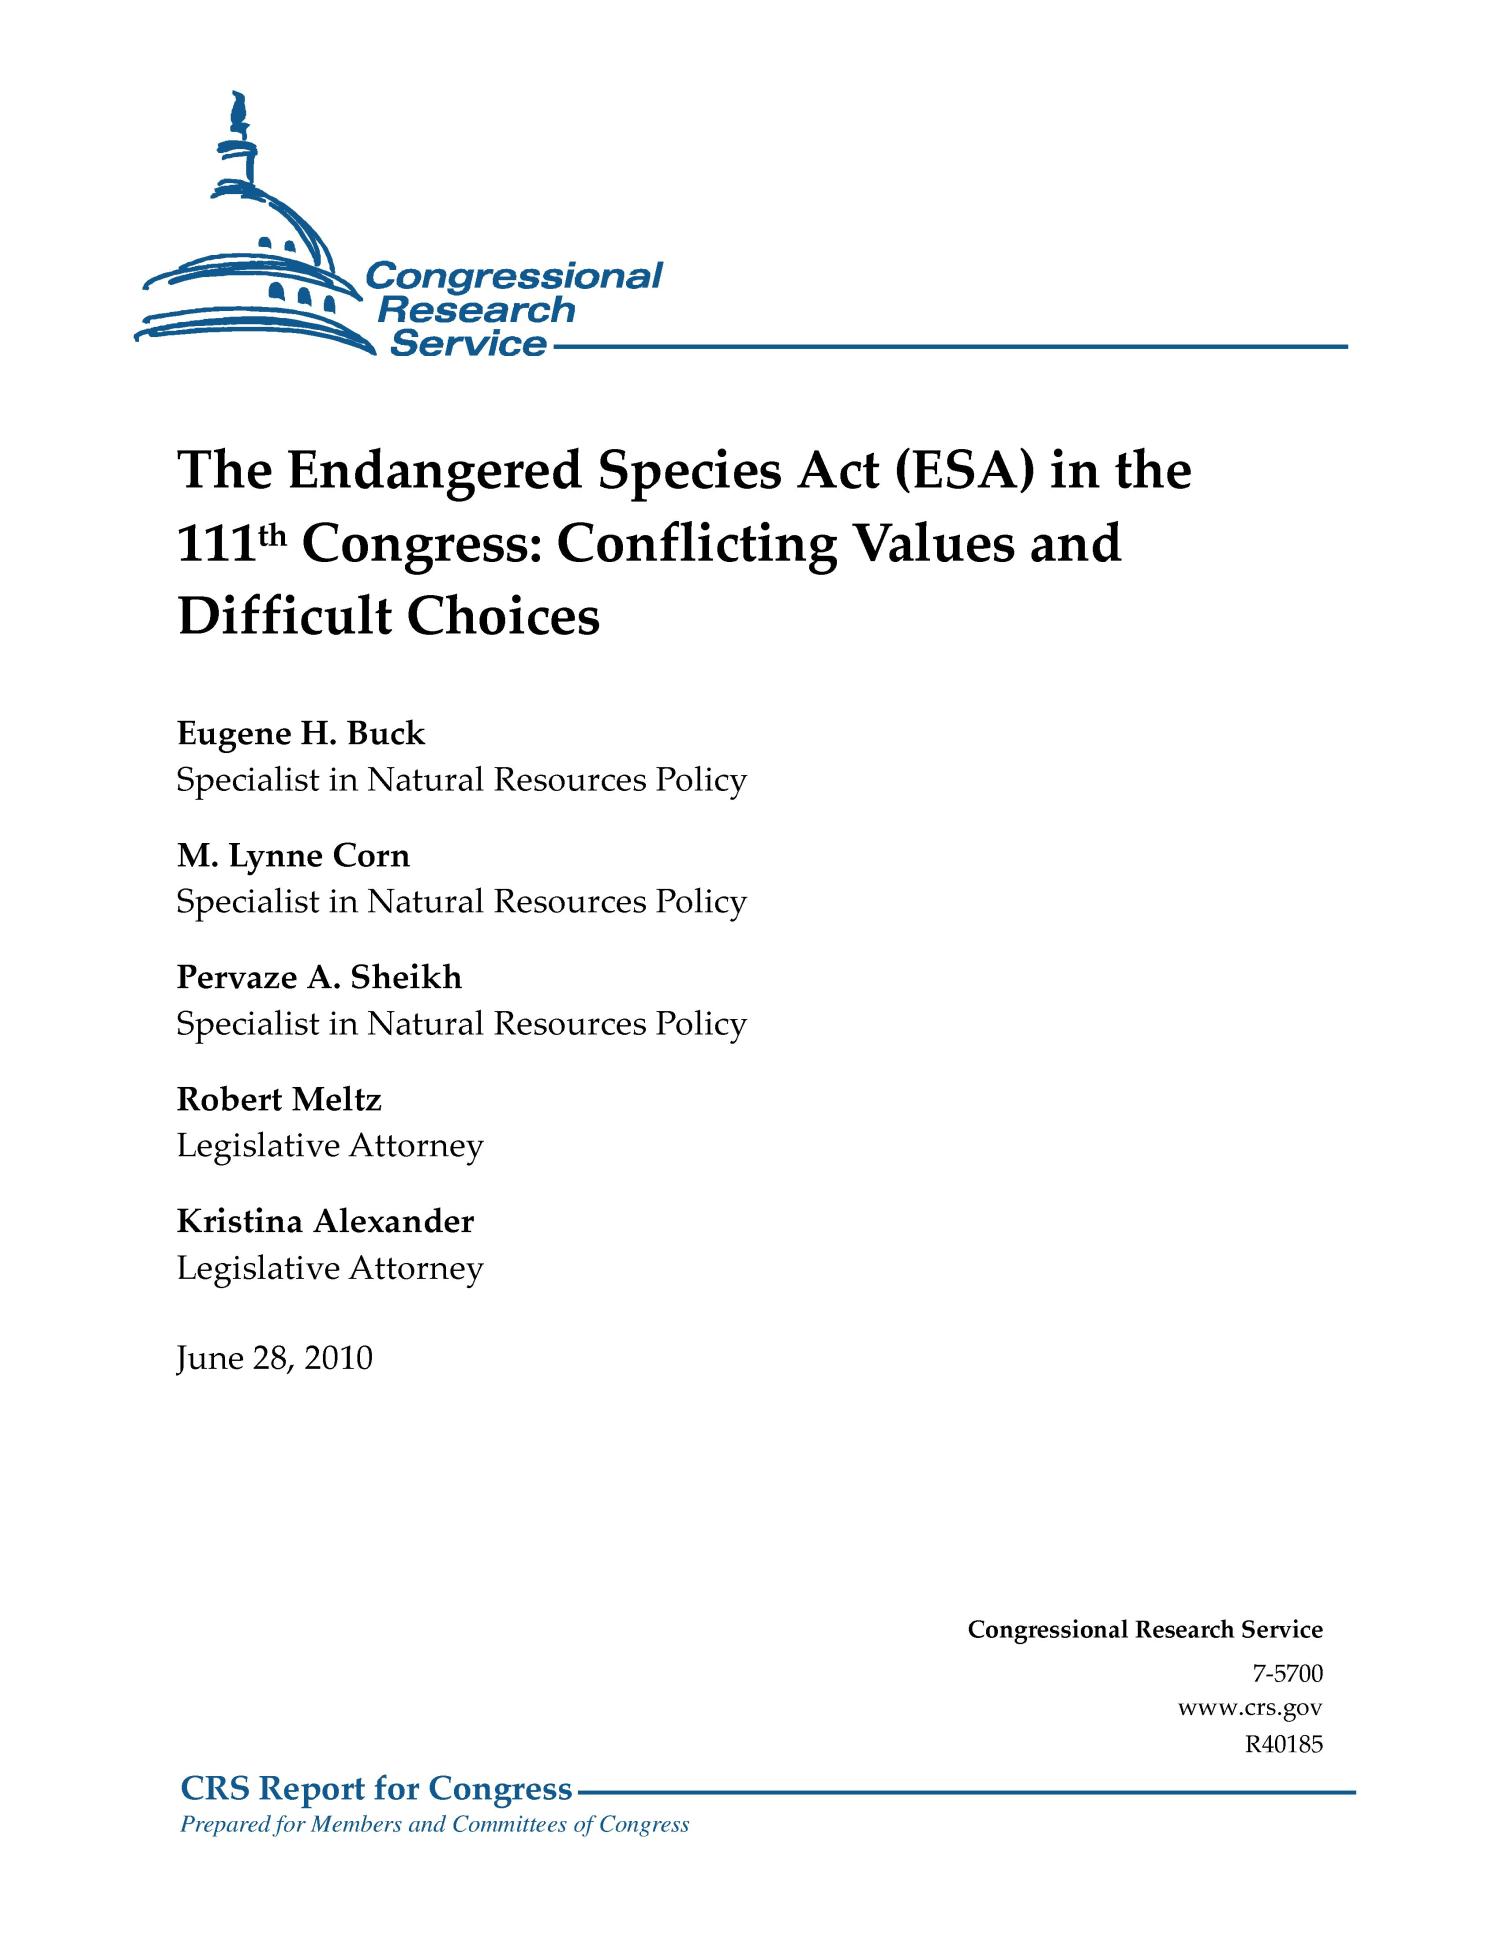 The Endangered Species Act (ESA) in the 111th Congress: Conflicting Values and Difficult Choices
                                                
                                                    [Sequence #]: 1 of 29
                                                